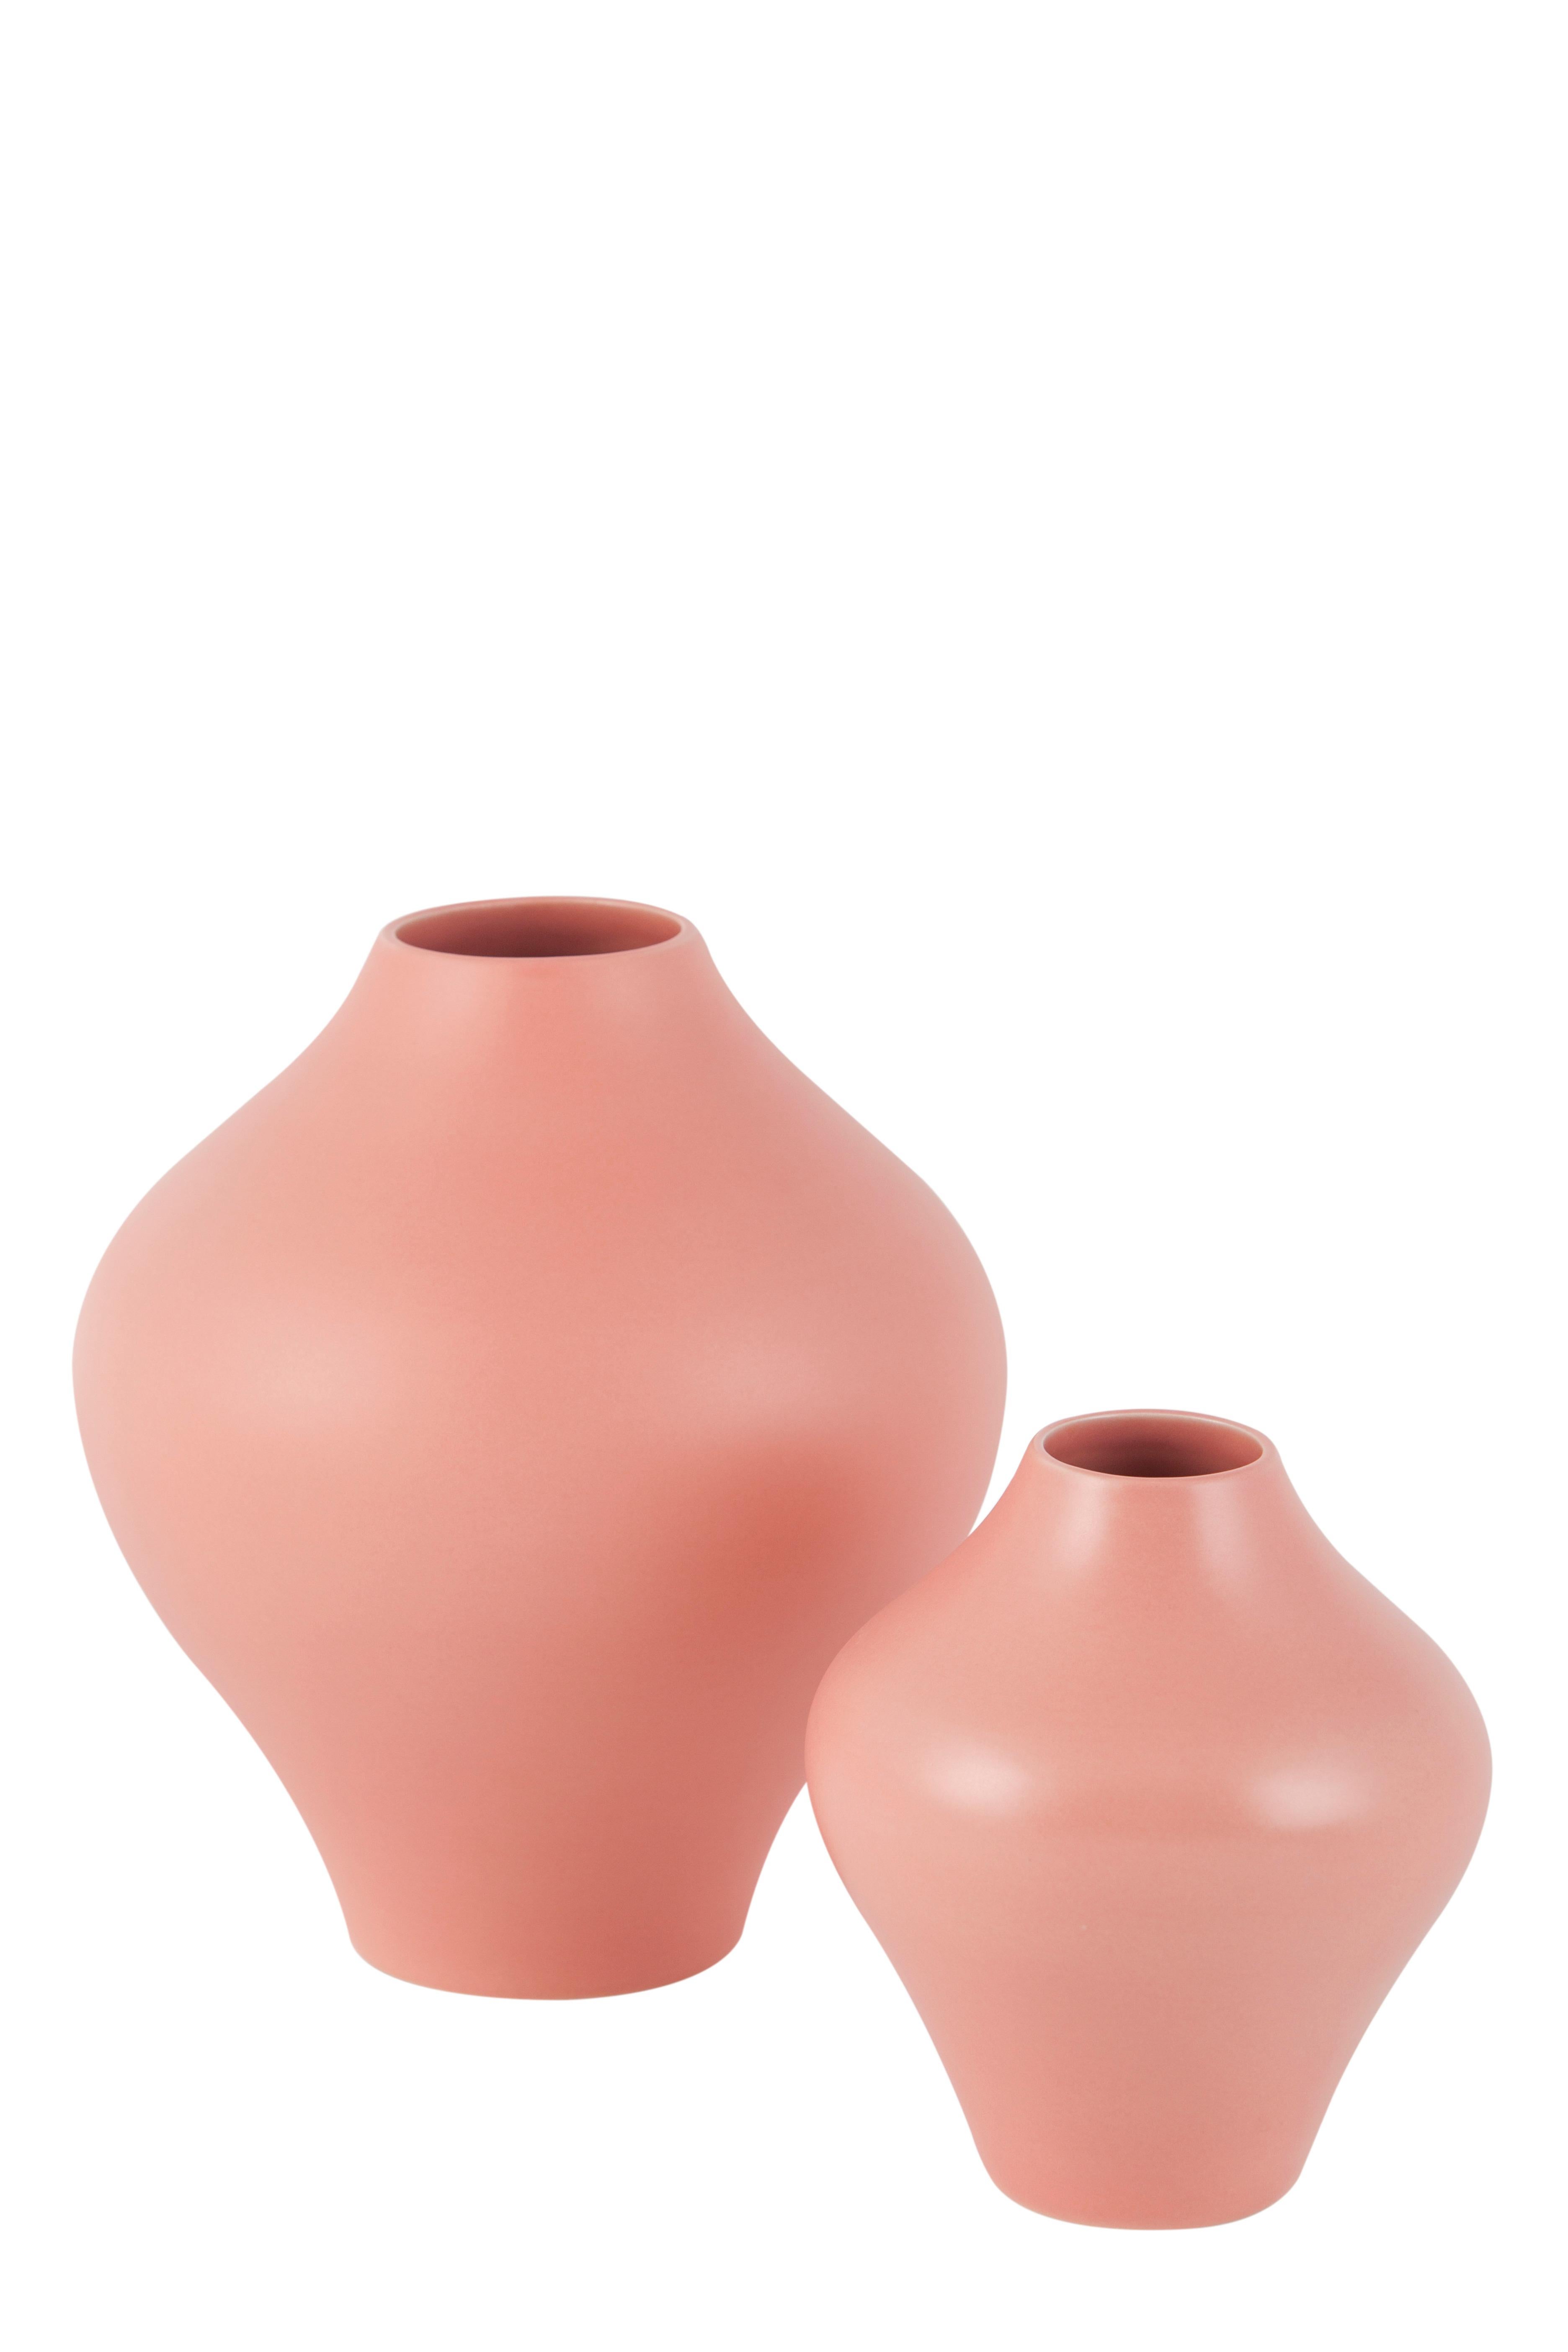 Set/8 Ceramic Vases, White & Peach, Handmade in Portugal by Lusitanus Home In New Condition For Sale In Lisboa, PT